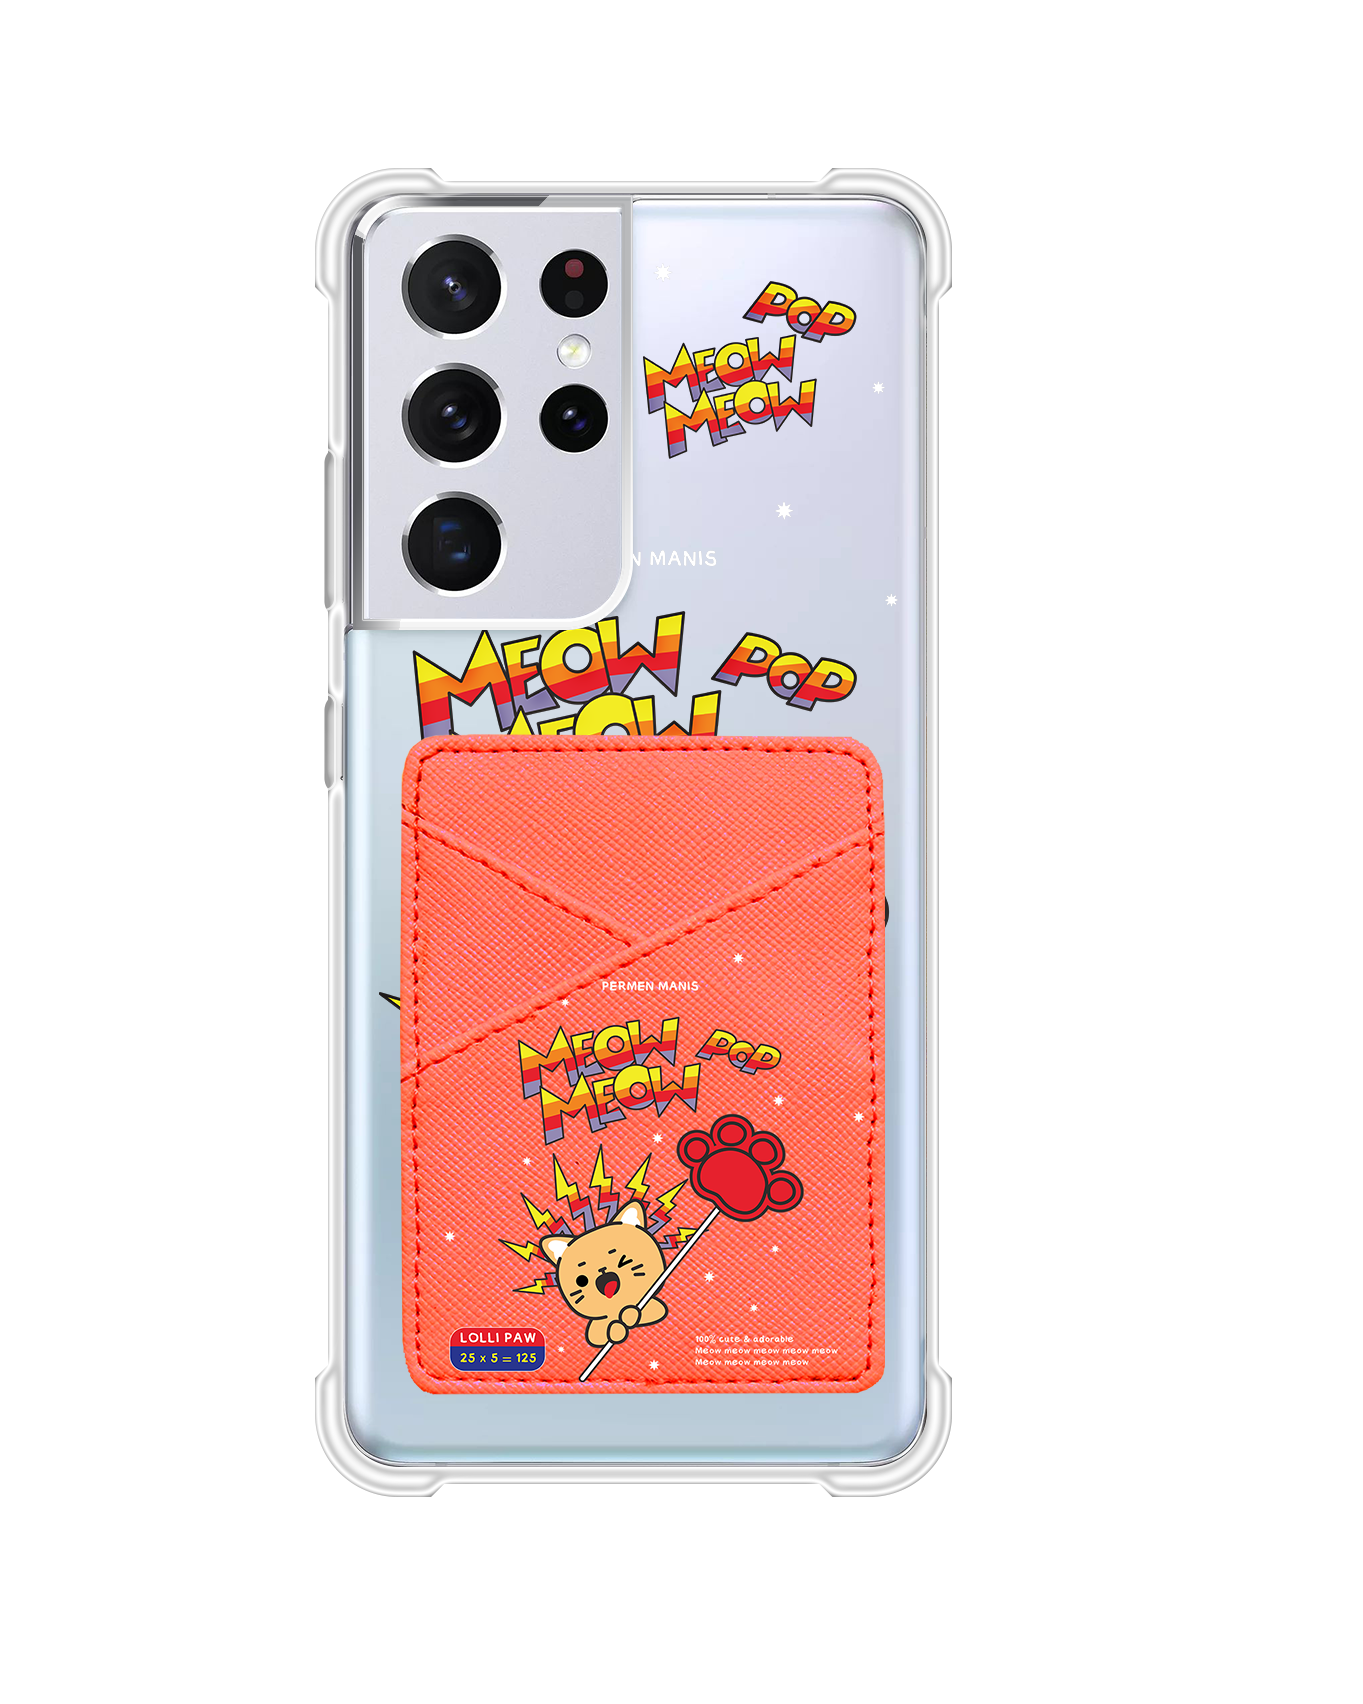 Android Phone Wallet Case - Meow Pop 2.0